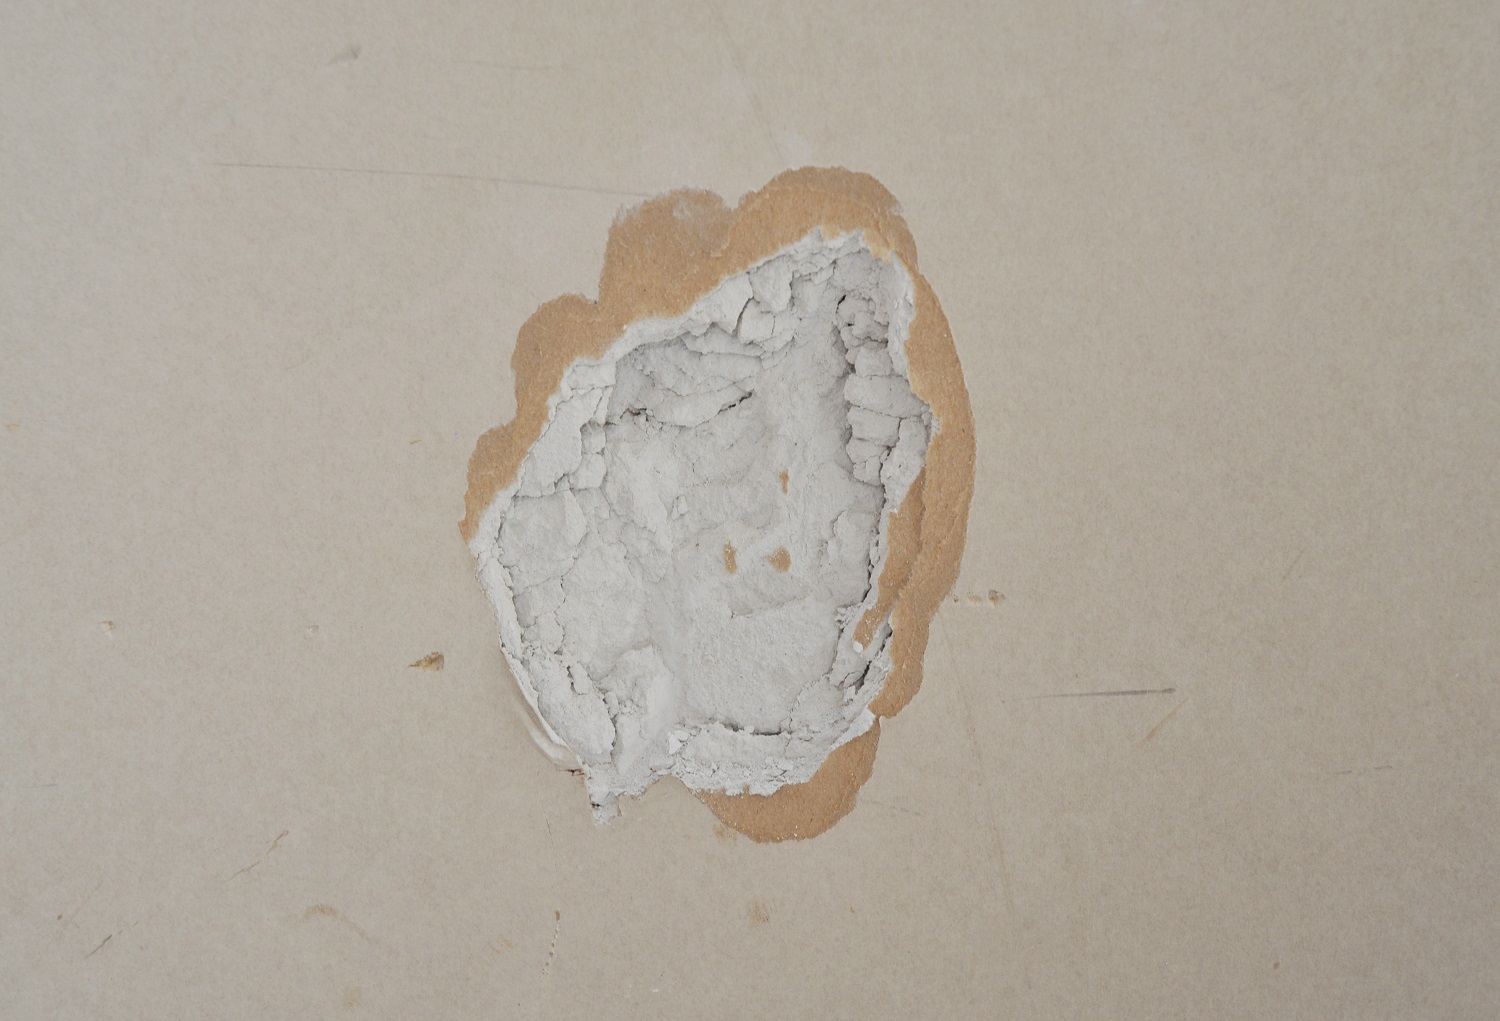 How to Fix a Hole in Drywall